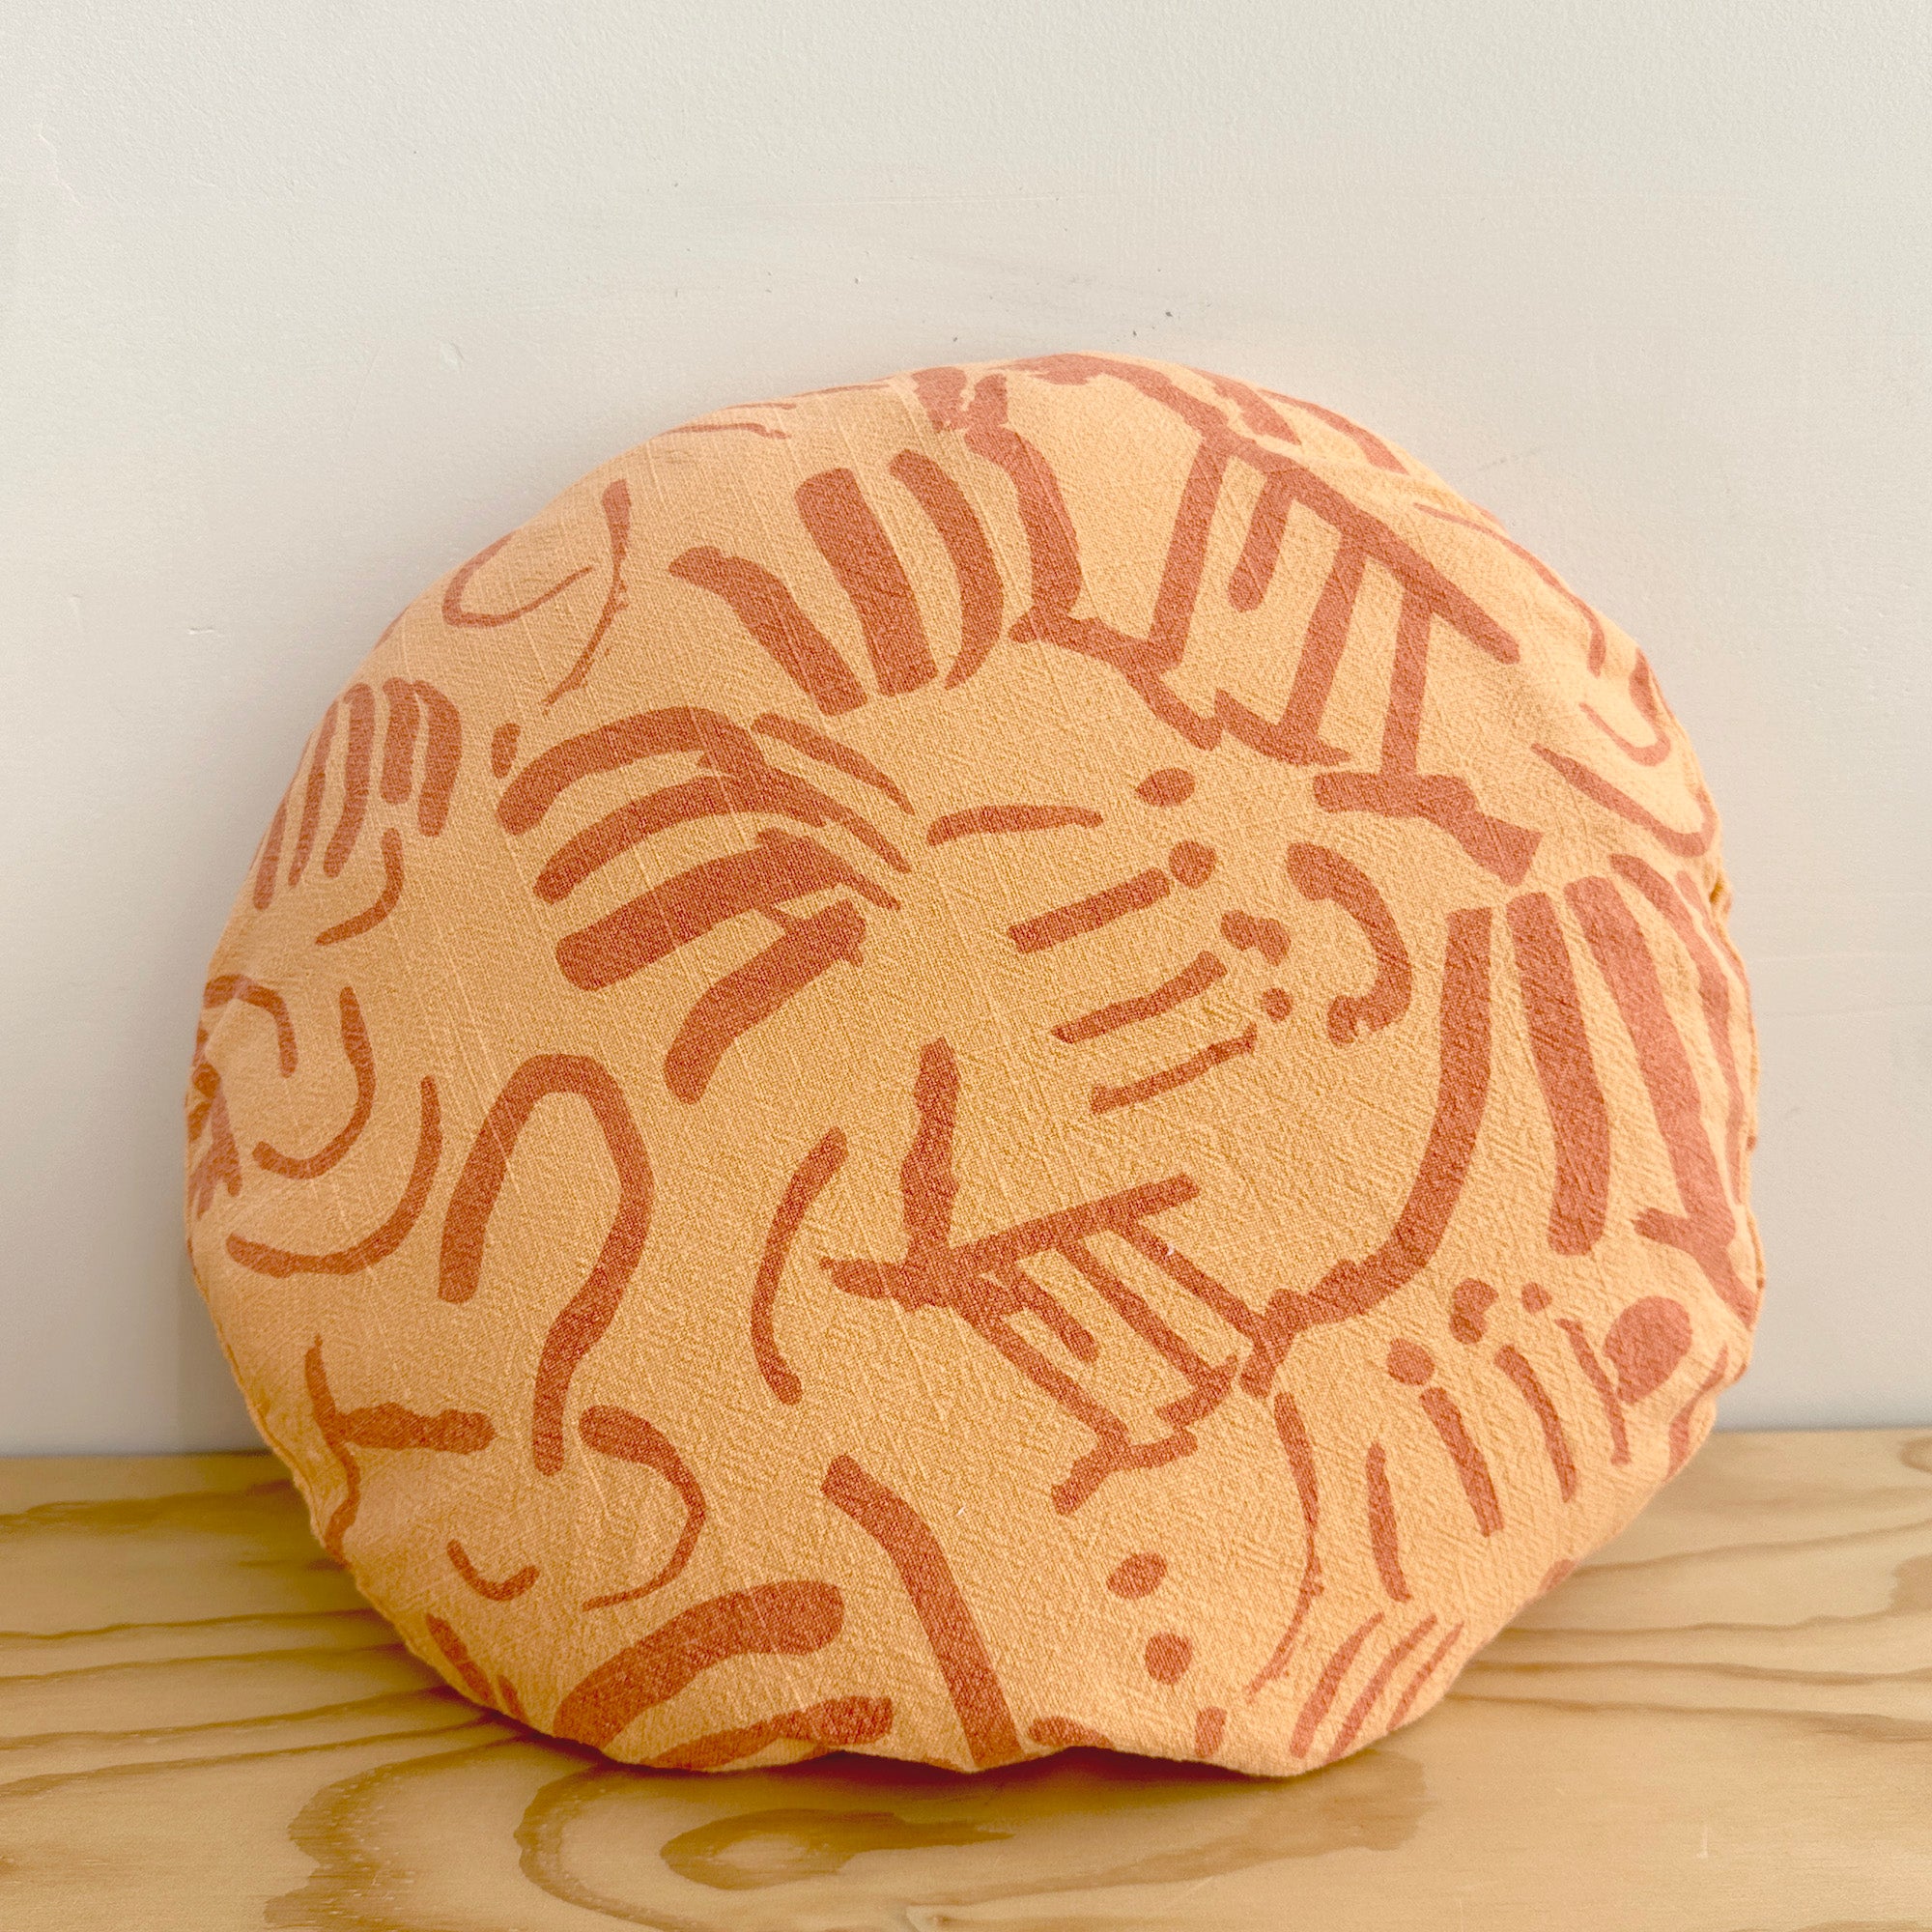 The Round Throw Pillow - Fold in Melon and Tangerine